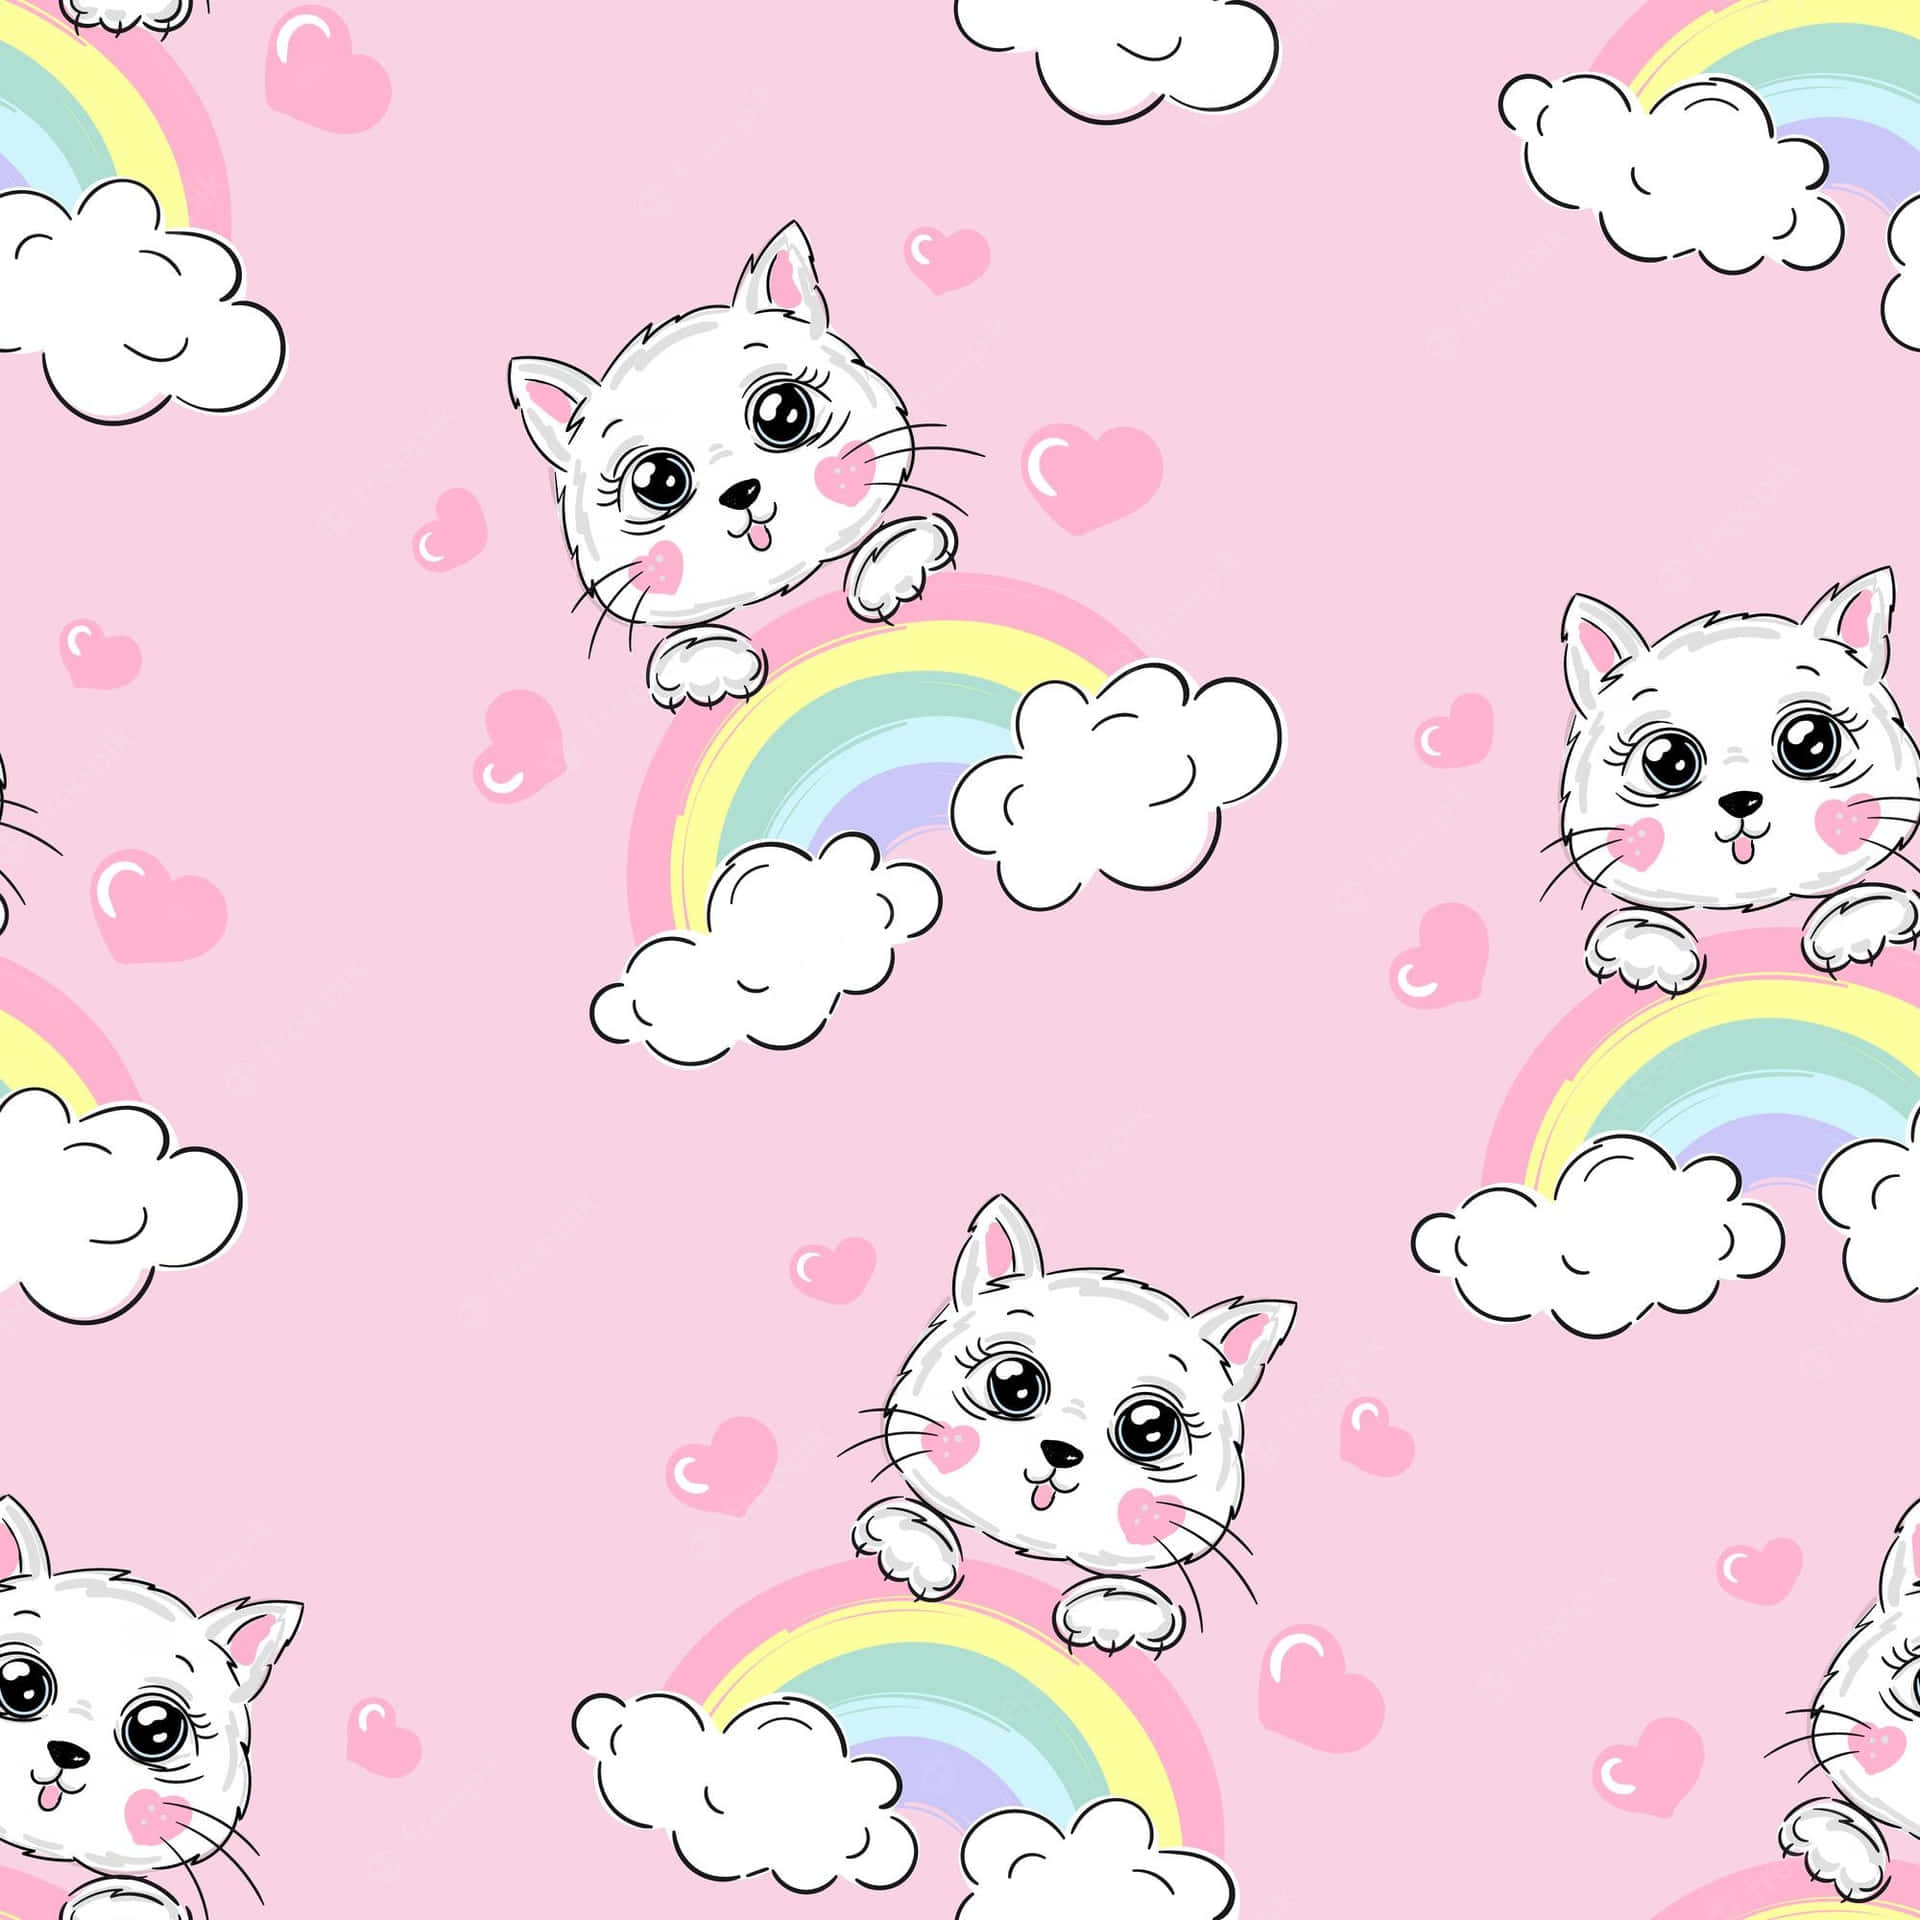 Cute Things Background Wallpaper